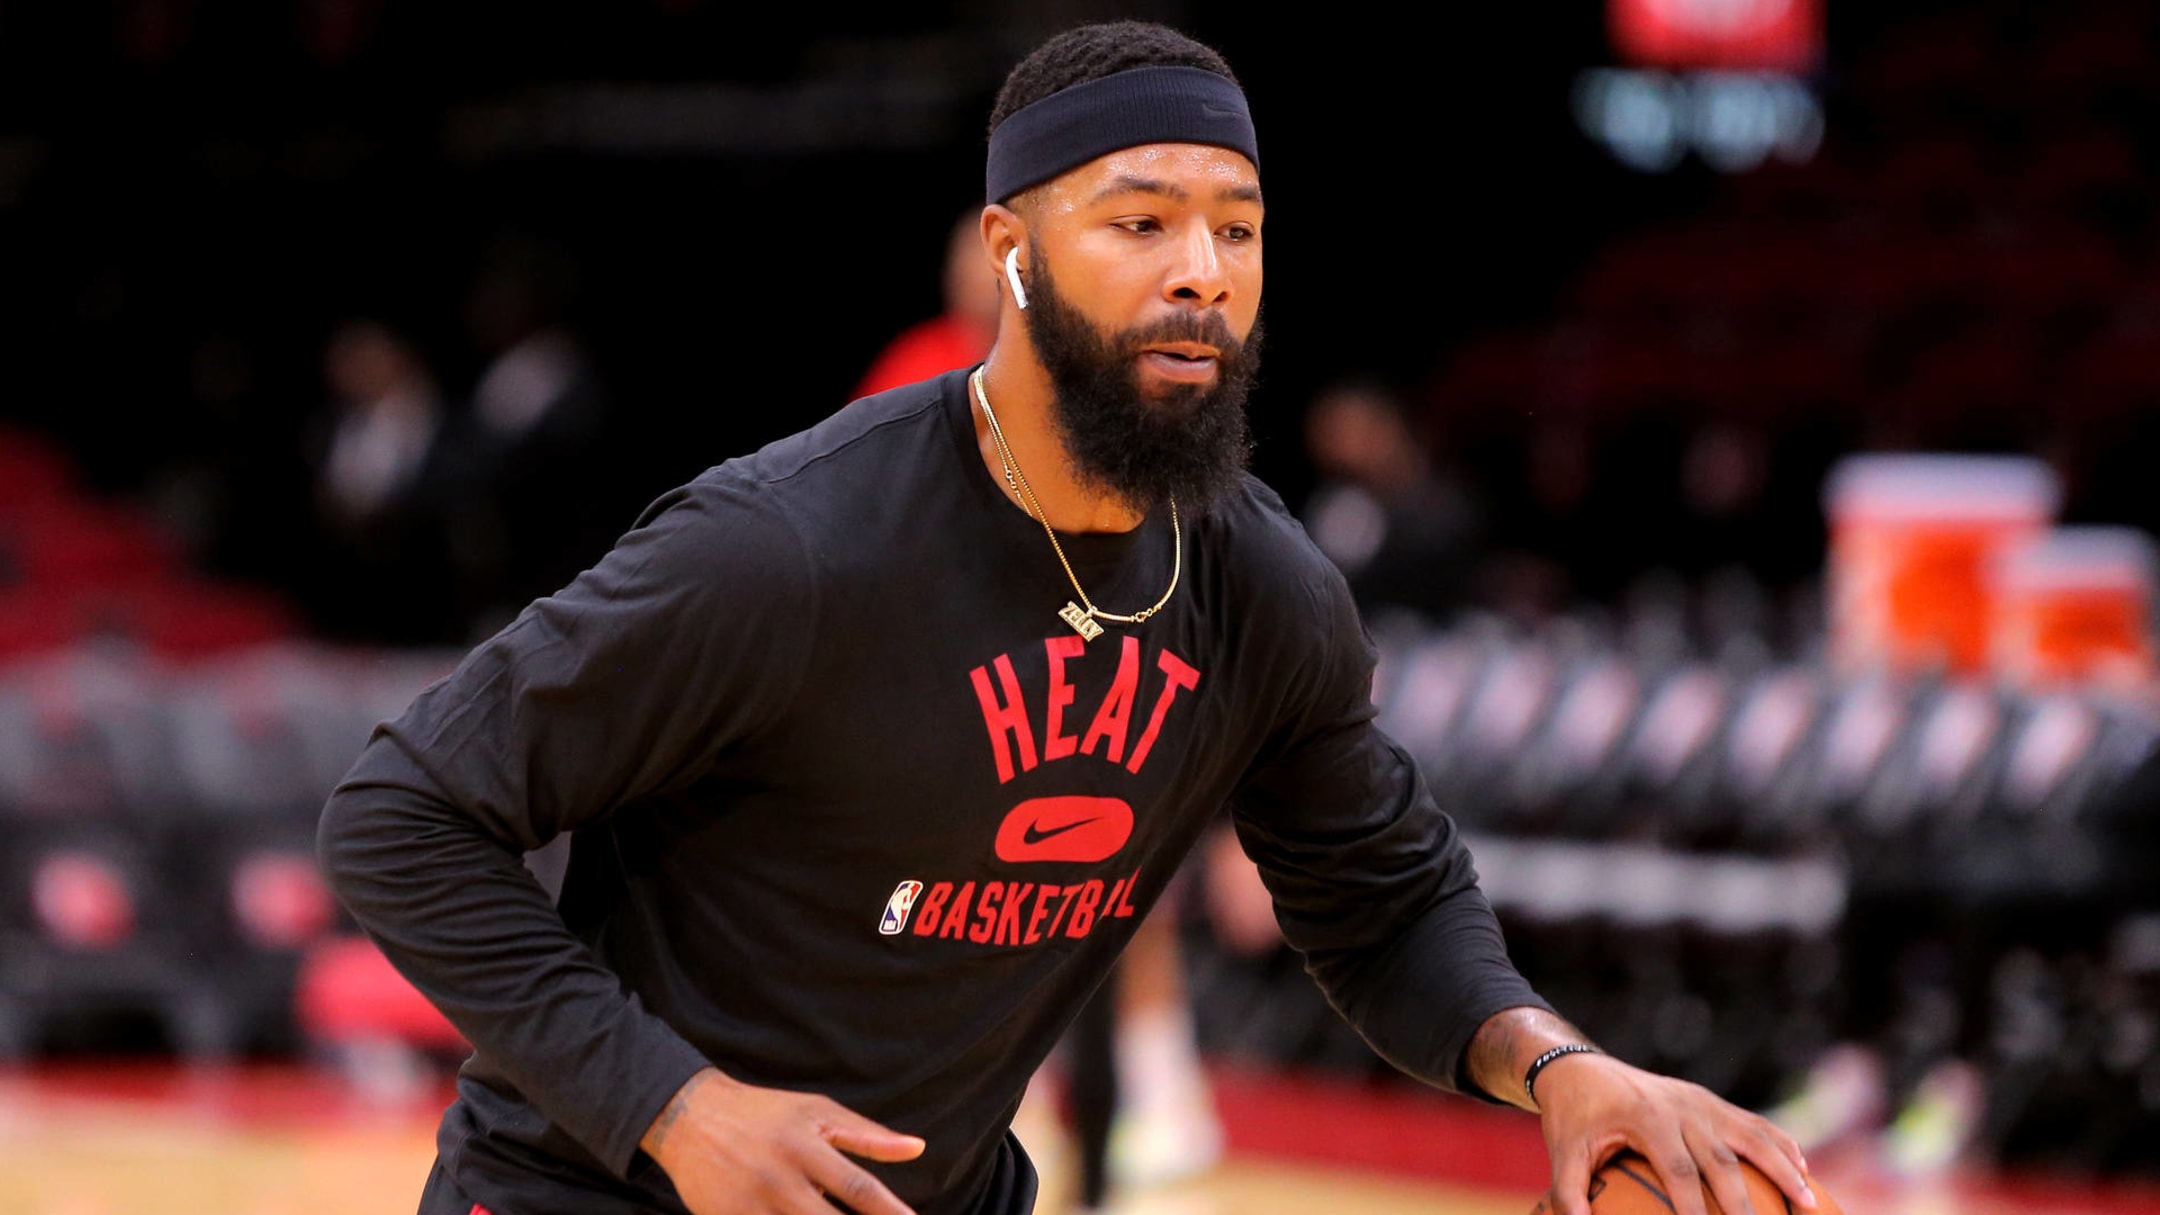 Markieff Morris wants to return to play but Heat reportedly uneasy about  clearing him - NBC Sports